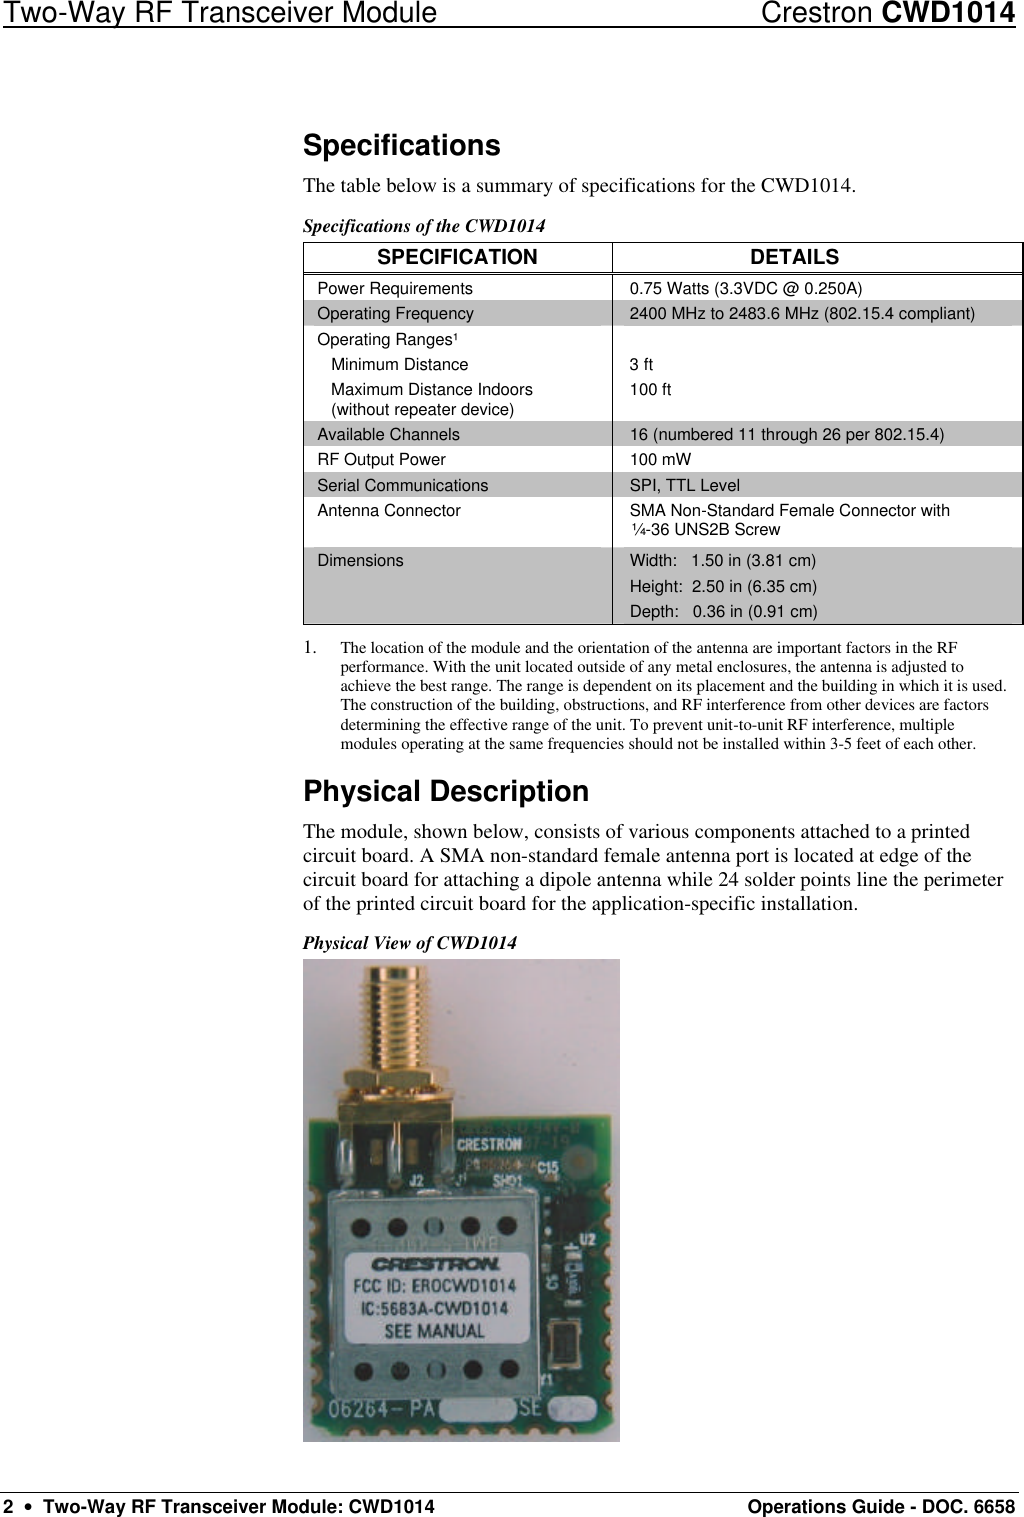 Two-Way RF Transceiver Module Crestron CWD1014 2  •  Two-Way RF Transceiver Module: CWD1014 Operations Guide - DOC. 6658 Specifications The table below is a summary of specifications for the CWD1014.  Specifications of the CWD1014 SPECIFICATION DETAILS Power Requirements 0.75 Watts (3.3VDC @ 0.250A) Operating Frequency 2400 MHz to 2483.6 MHz (802.15.4 compliant) Operating Ranges¹  Minimum Distance  Maximum Distance Indoors   (without repeater device)  3 ft 100 ft  Available Channels 16 (numbered 11 through 26 per 802.15.4)  RF Output Power 100 mW Serial Communications SPI, TTL Level Antenna Connector  SMA Non-Standard Female Connector with ¼-36 UNS2B Screw Dimensions Width:   1.50 in (3.81 cm) Height:  2.50 in (6.35 cm) Depth:   0.36 in (0.91 cm) 1. The location of the module and the orientation of the antenna are important factors in the RF performance. With the unit located outside of any metal enclosures, the antenna is adjusted to achieve the best range. The range is dependent on its placement and the building in which it is used. The construction of the building, obstructions, and RF interference from other devices are factors determining the effective range of the unit. To prevent unit-to-unit RF interference, multiple modules operating at the same frequencies should not be installed within 3-5 feet of each other. Physical Description The module, shown below, consists of various components attached to a printed circuit board. A SMA non-standard female antenna port is located at edge of the circuit board for attaching a dipole antenna while 24 solder points line the perimeter of the printed circuit board for the application-specific installation. Physical View of CWD1014  